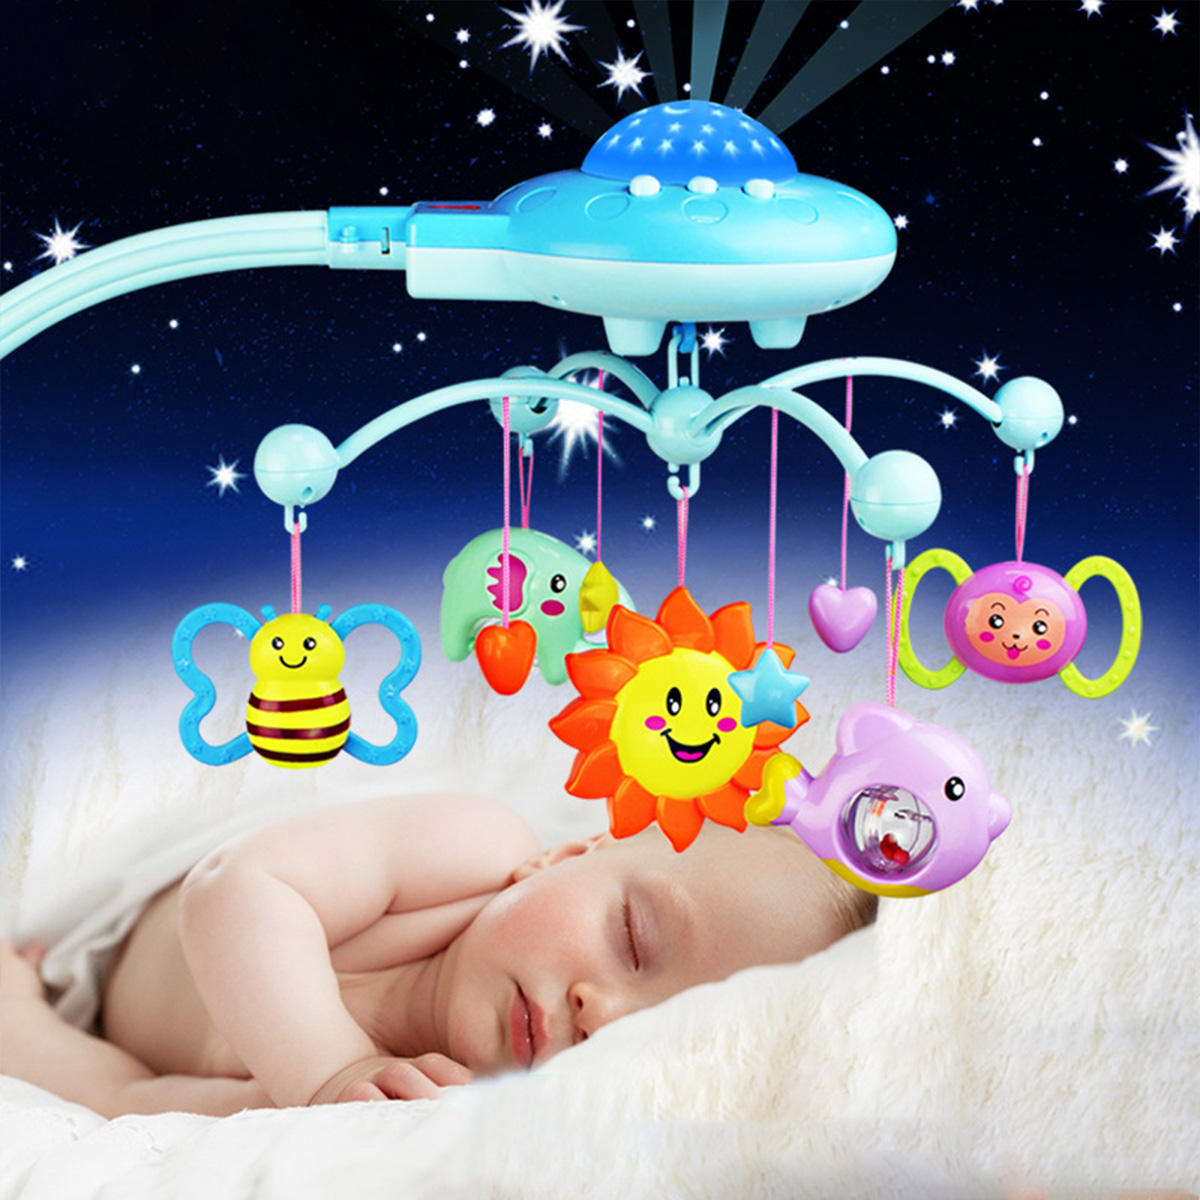 Crib-Mobile-Musical-Bed-Bell-With-Animal-Rattles-Projection-Early-Learning-Toys-0-12-Months-1434065-1